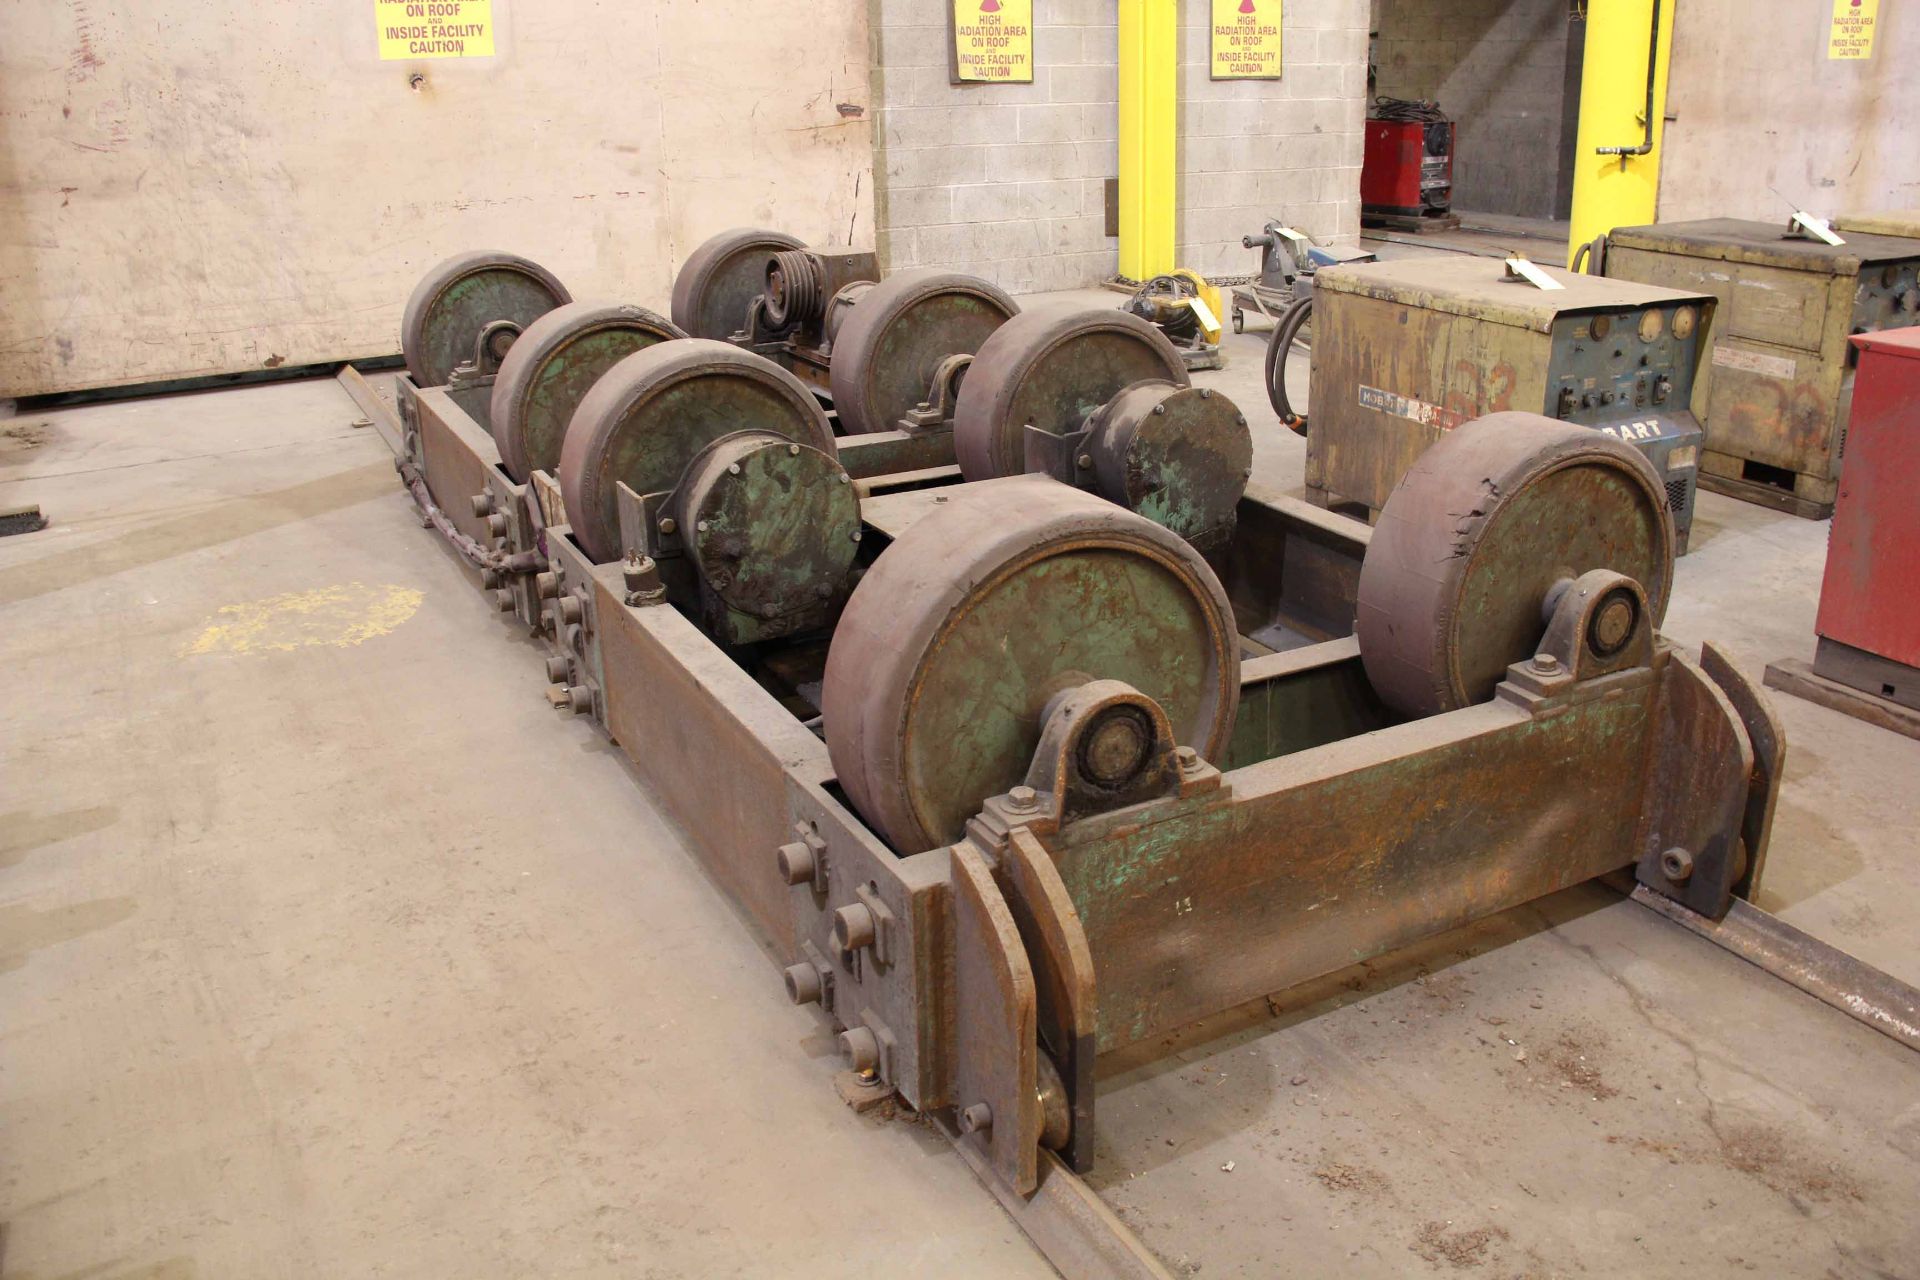 POWER TURNING ROLL SET, ARONSON APPROX. 30 T. CAP., 20" dia. x 7" rubber tires, variable spd. drive, - Image 3 of 3